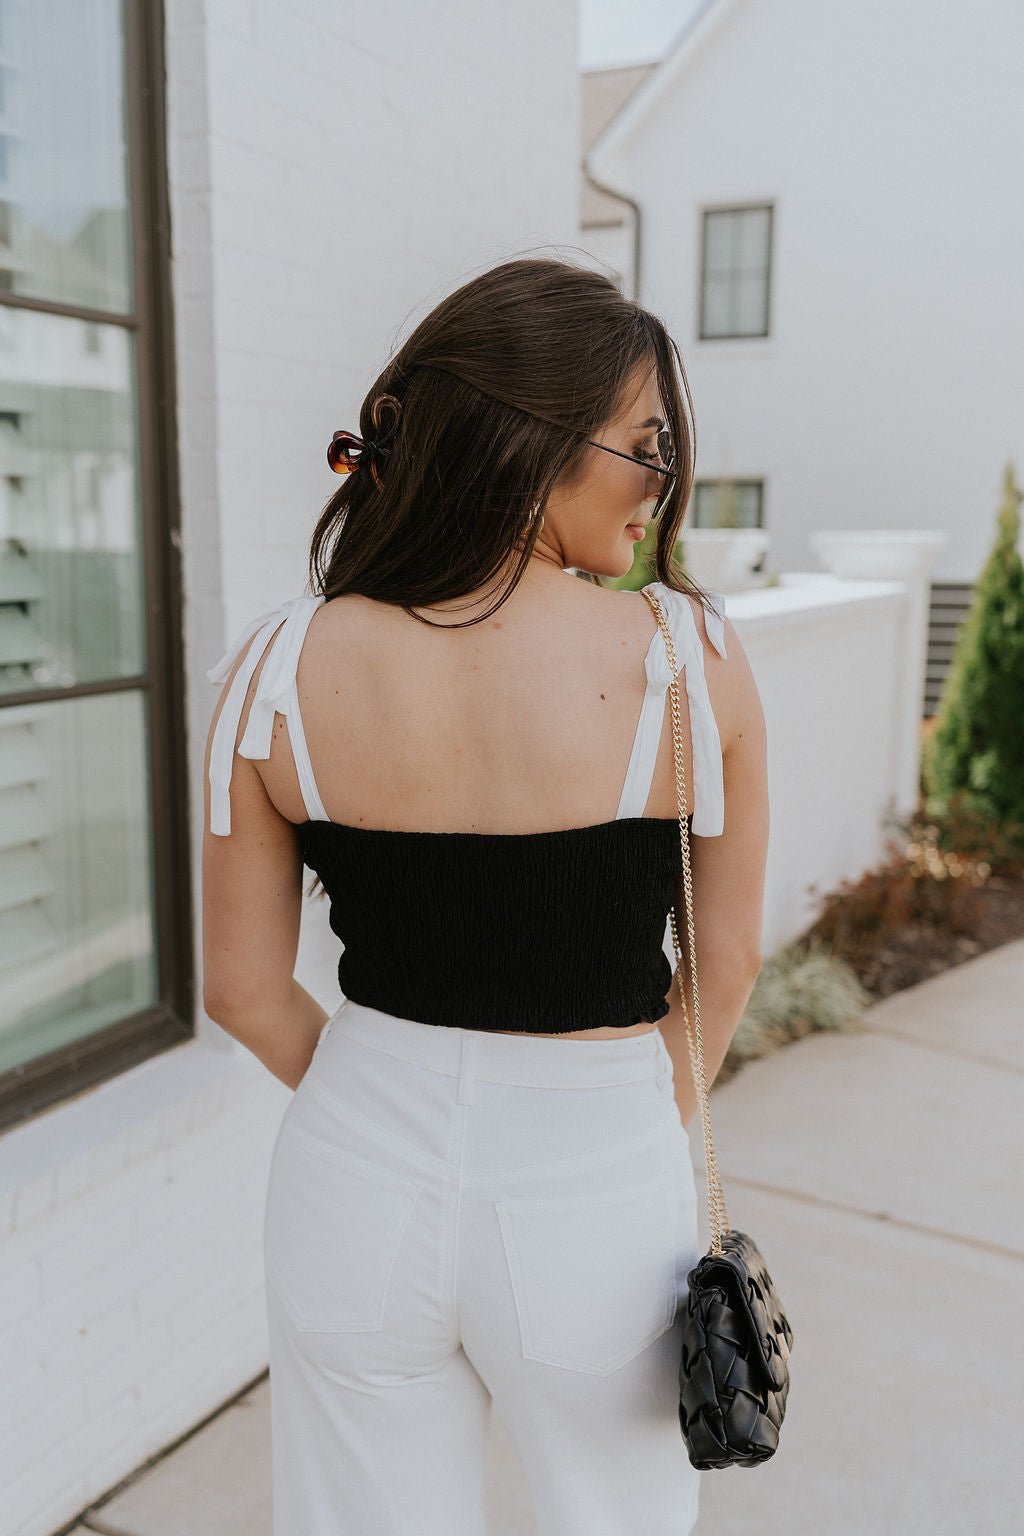 Back view of female model wearing the Reese Black & White Cropped Tank Top that has black smocked body, white tie straps and a cropped waist. Worn with white pants.